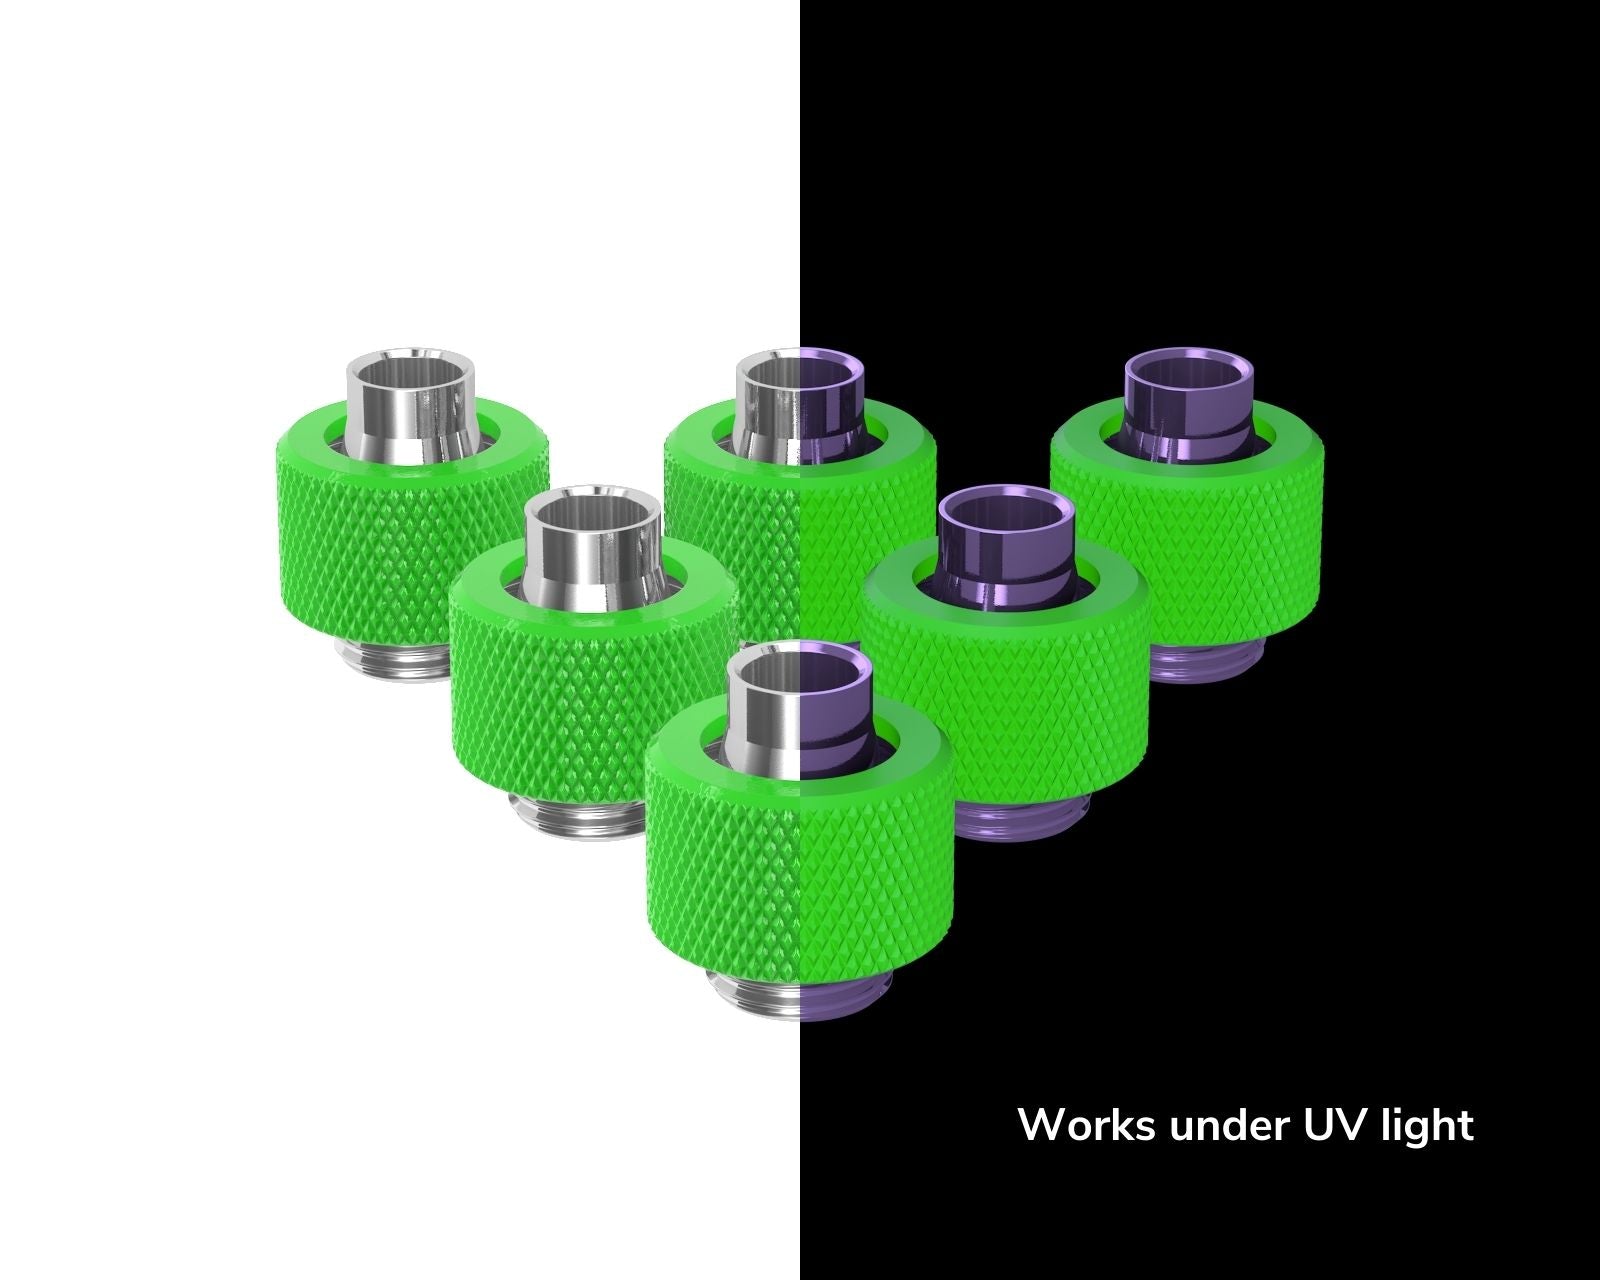 PrimoChill SecureFit SX - Premium Compression Fitting For 3/8in ID x 1/2in OD Flexible Tubing 6 Pack (F-SFSX12-6) - Available in 20+ Colors, Custom Watercooling Loop Ready - UV Green